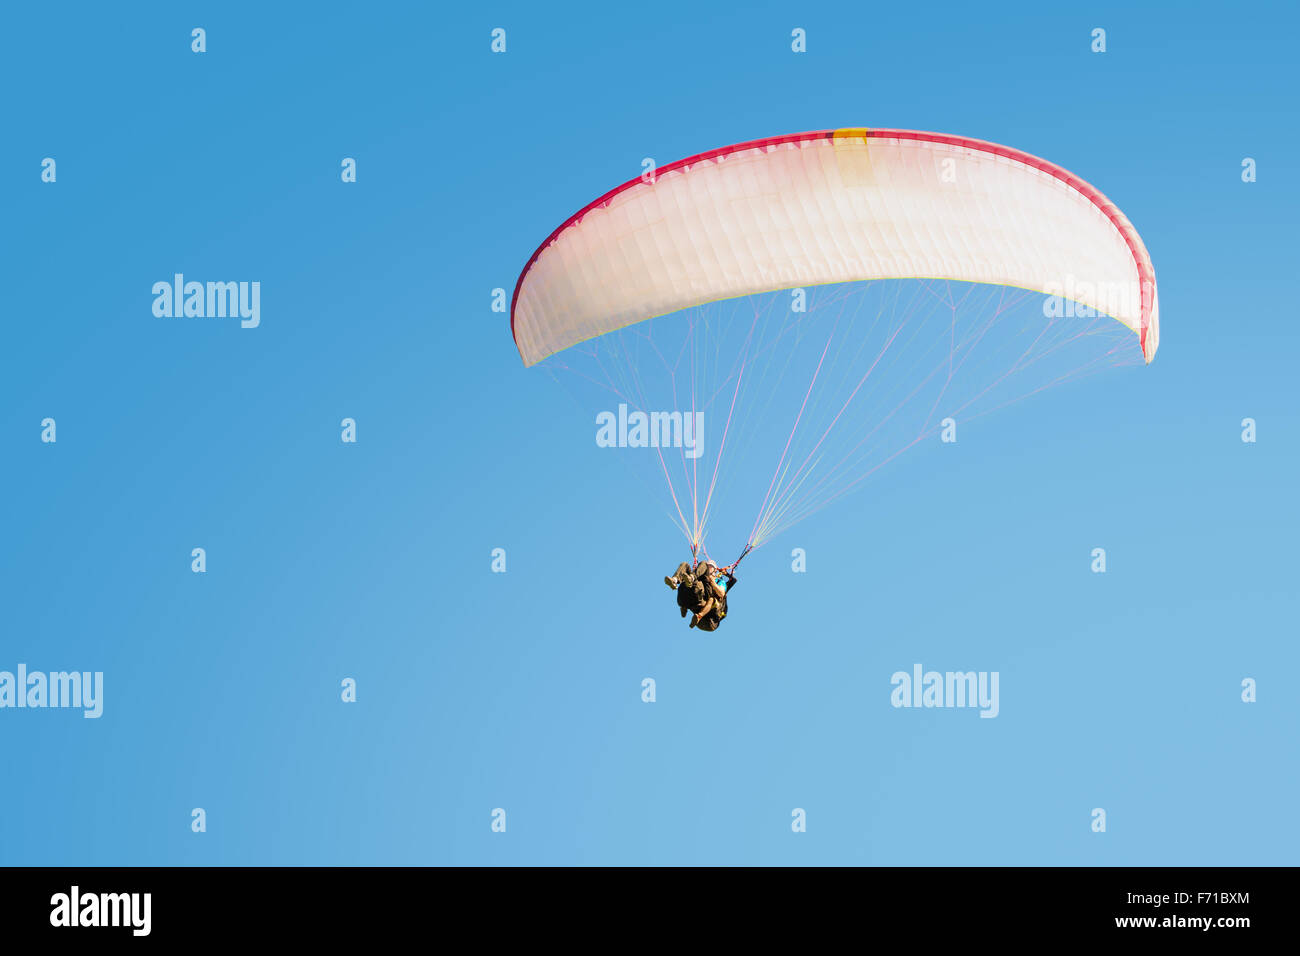 Adrenaline impressions and freedom feeling emotions paragliding tandem flights extremal active sport Stock Photo